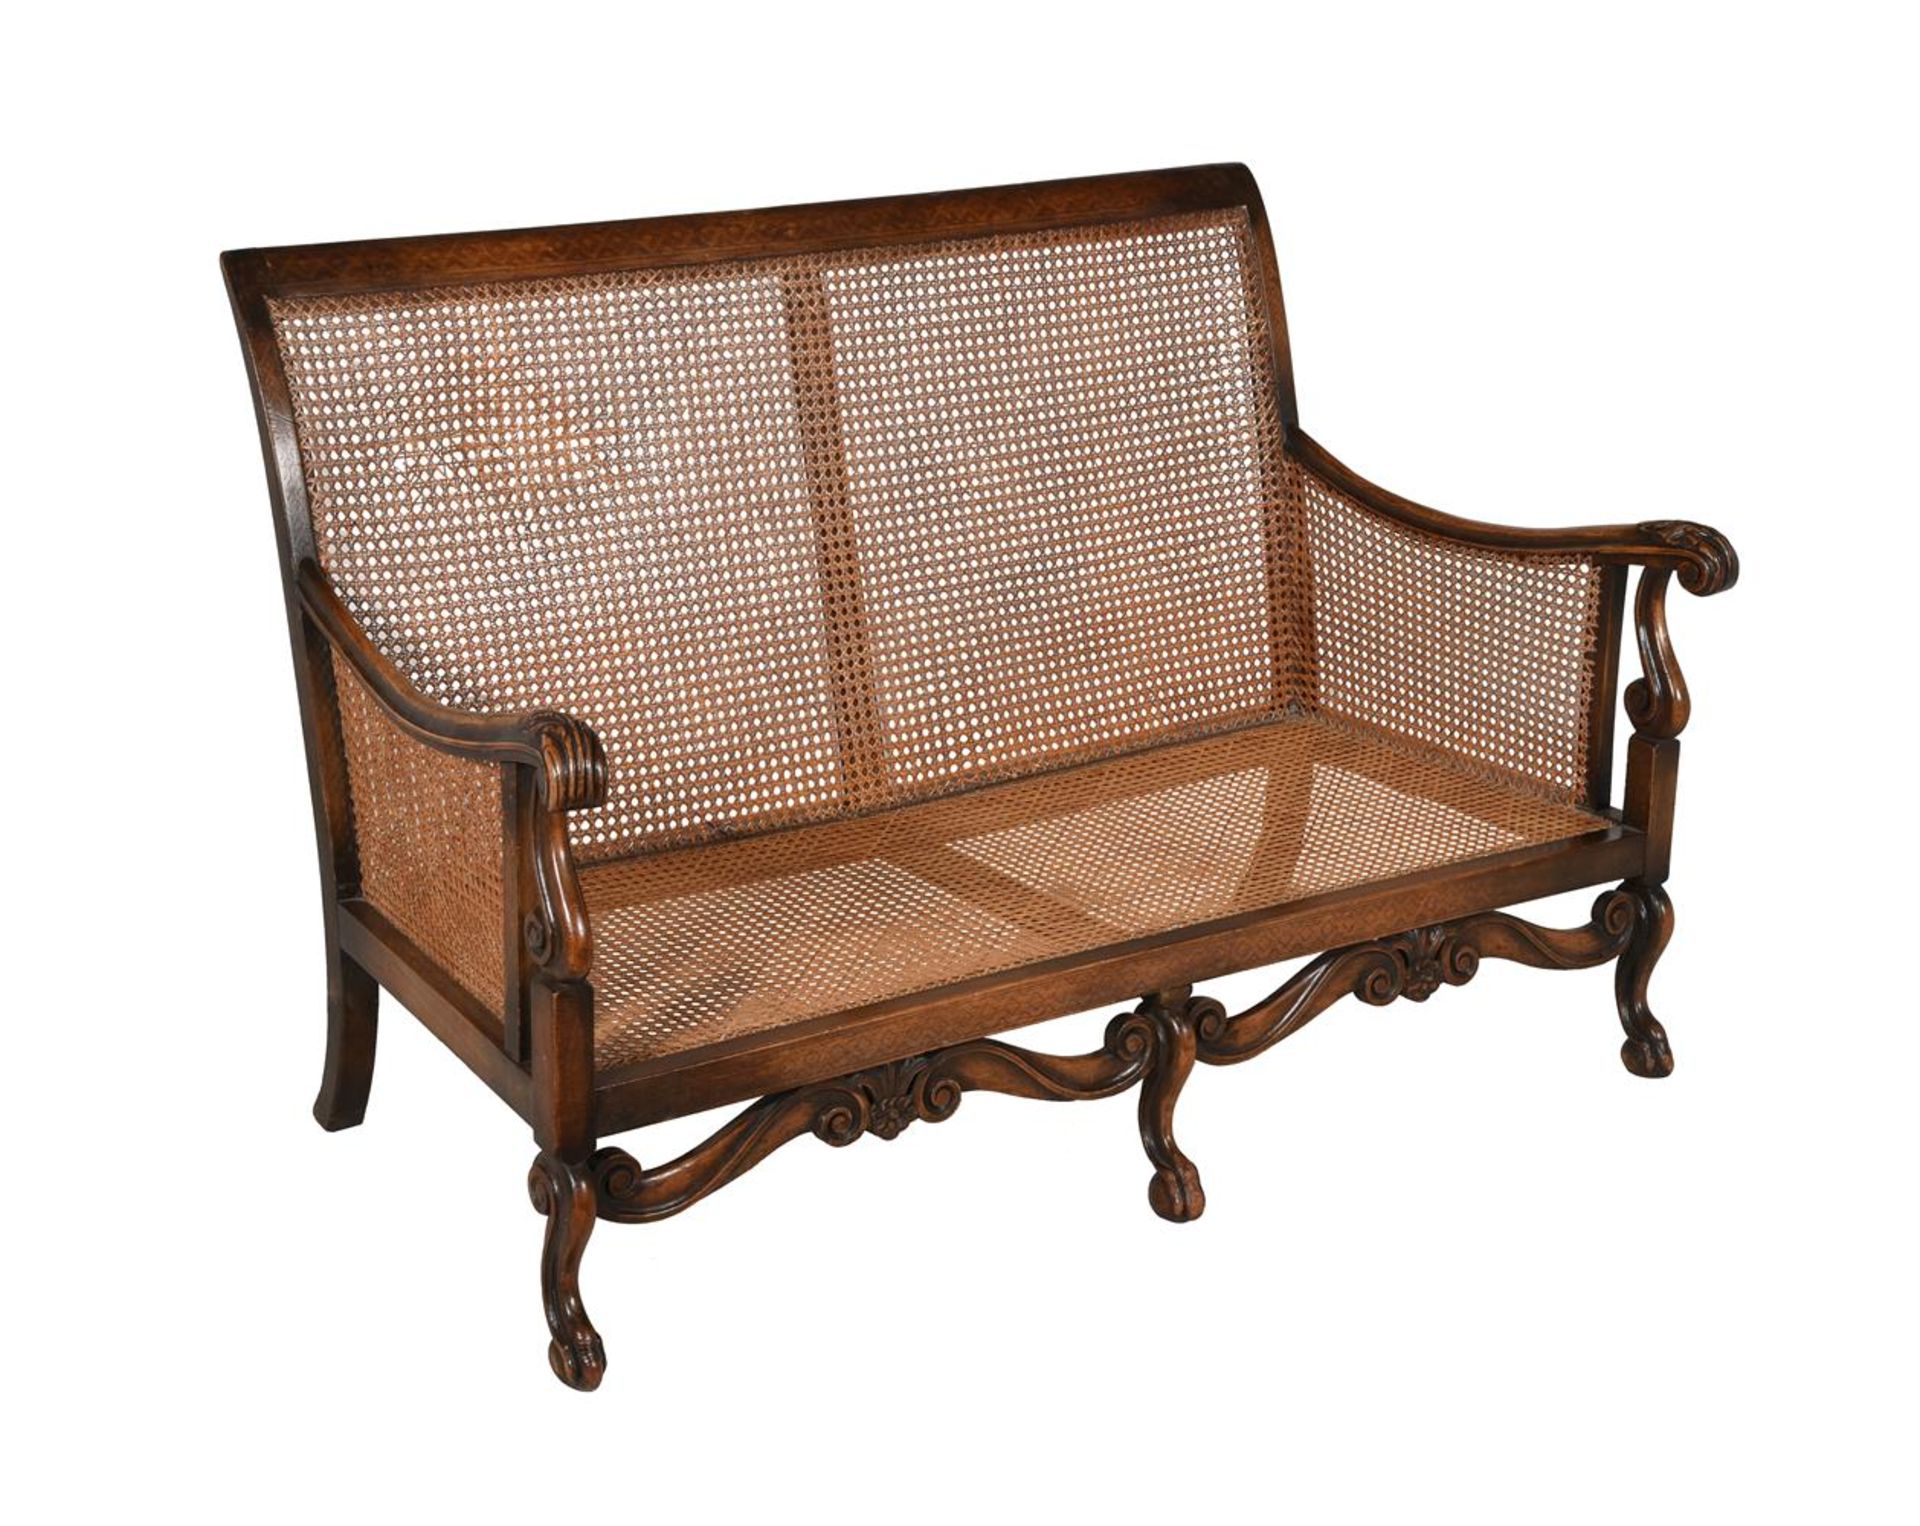 A CARVED BEECH BERGERE SETTEE IN LATE 17TH CENTURY STYLE - Image 5 of 8